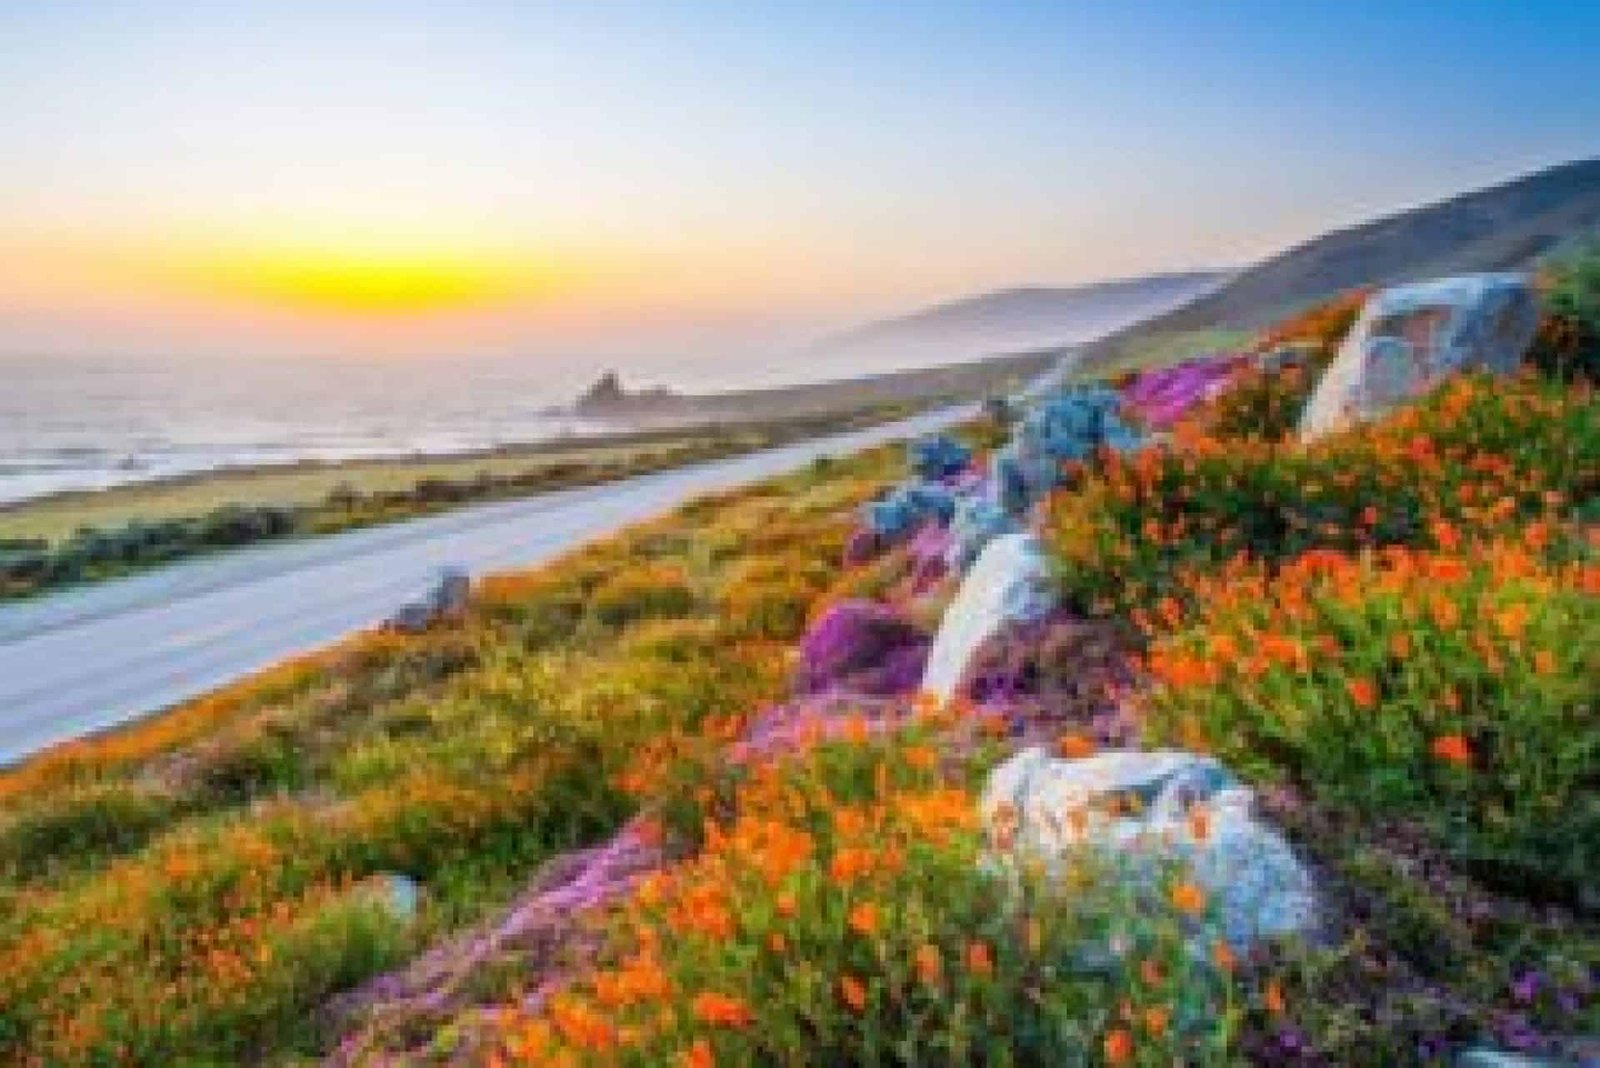 Best places to visit in California